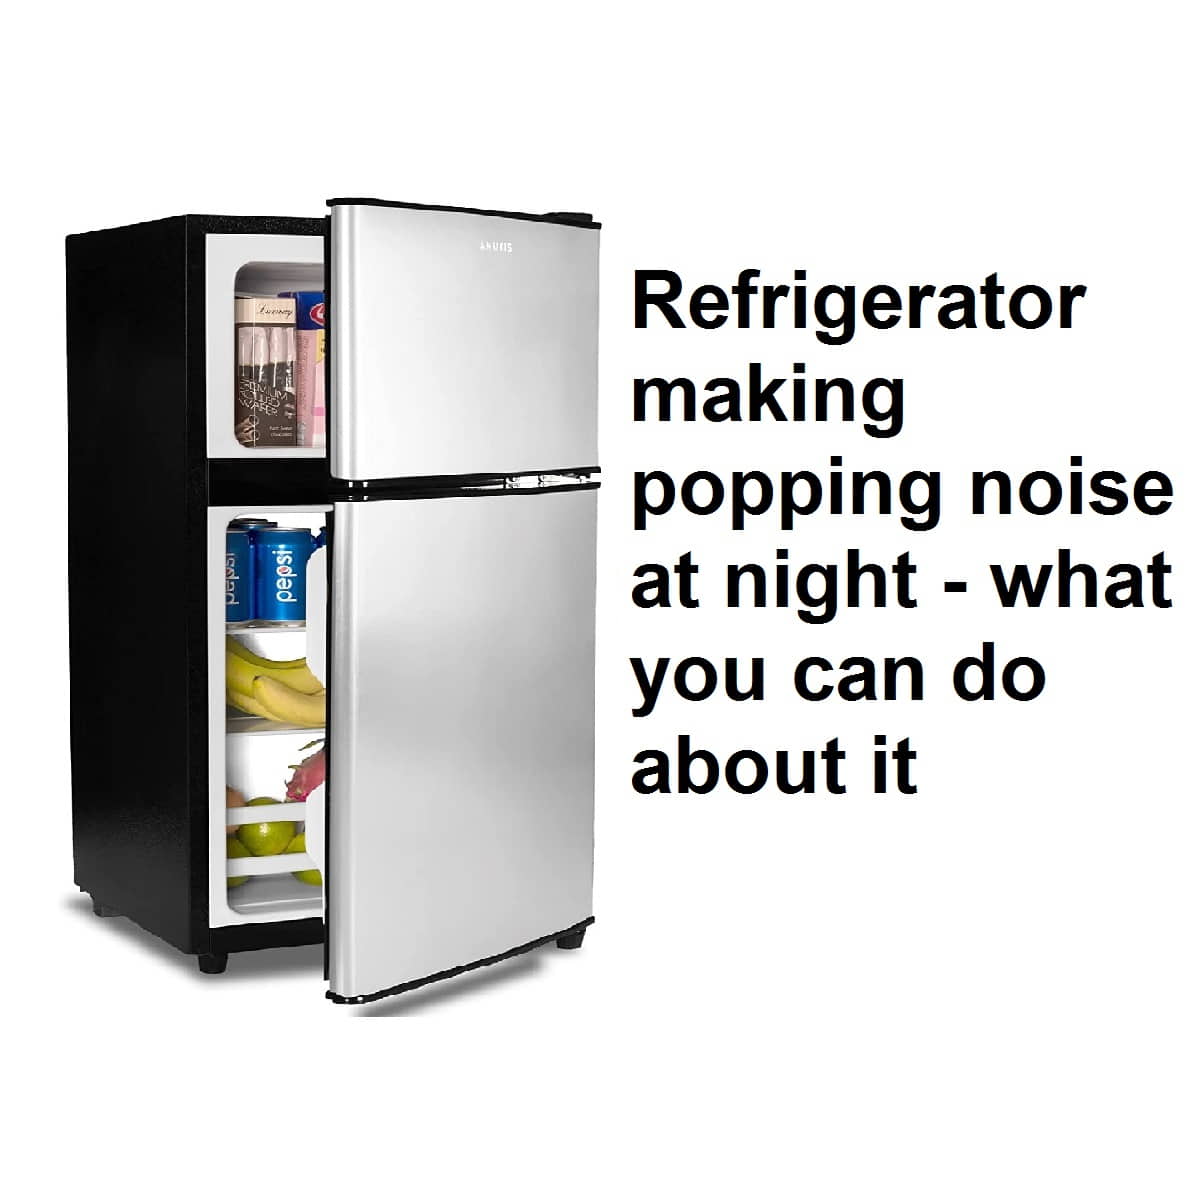 Refrigerator making popping noise at night